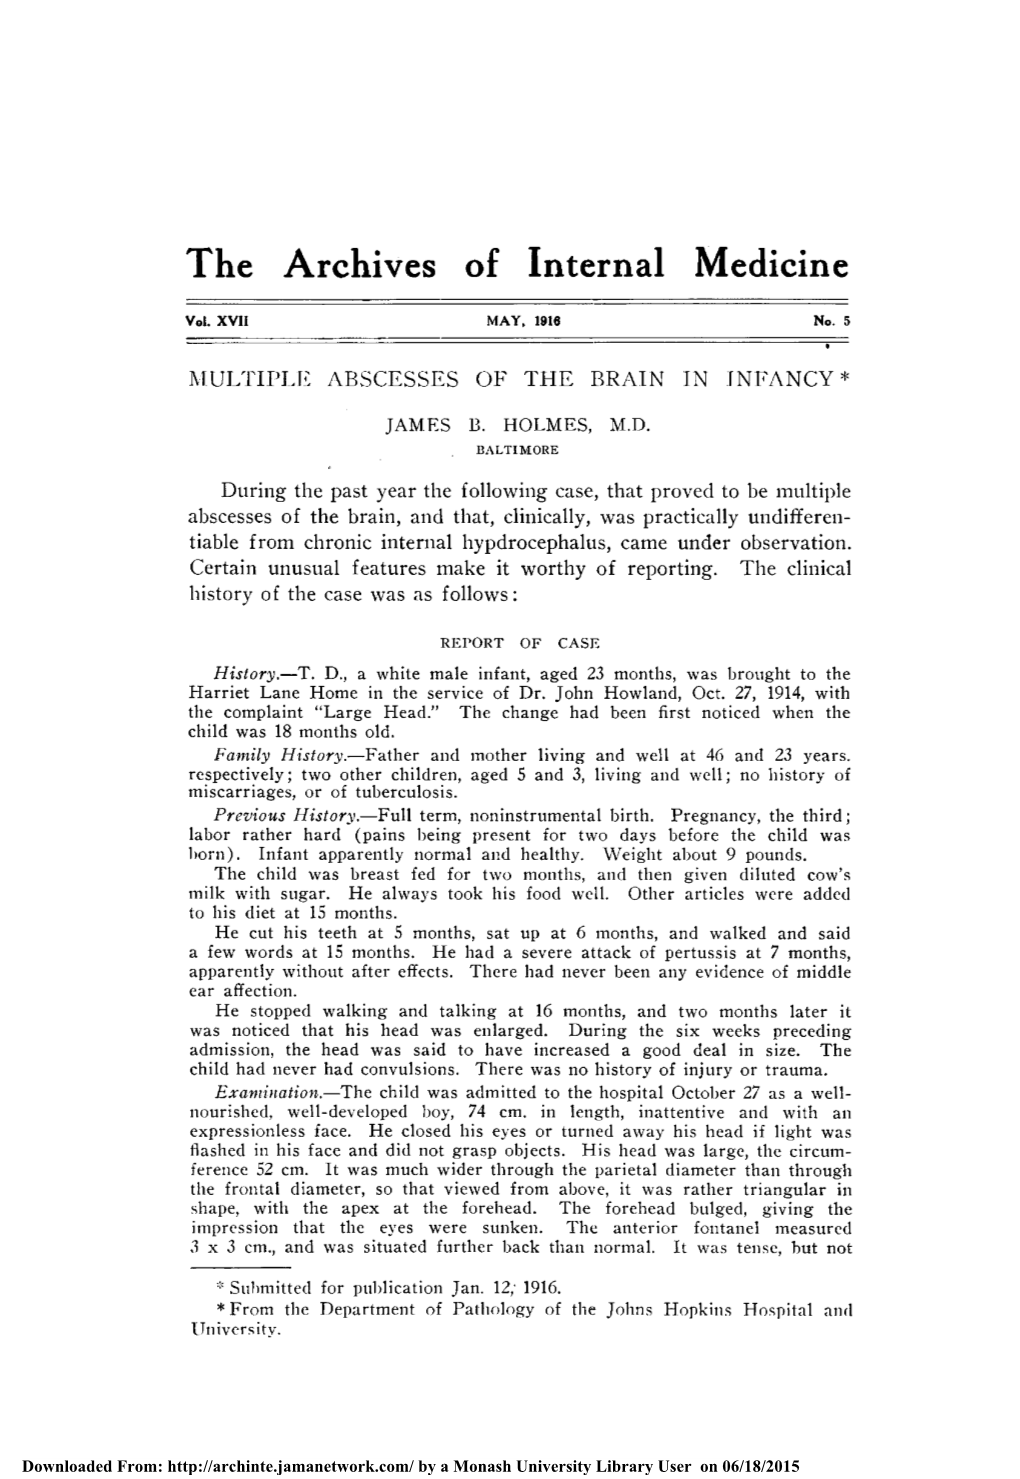 The Archives of Internal Medicine